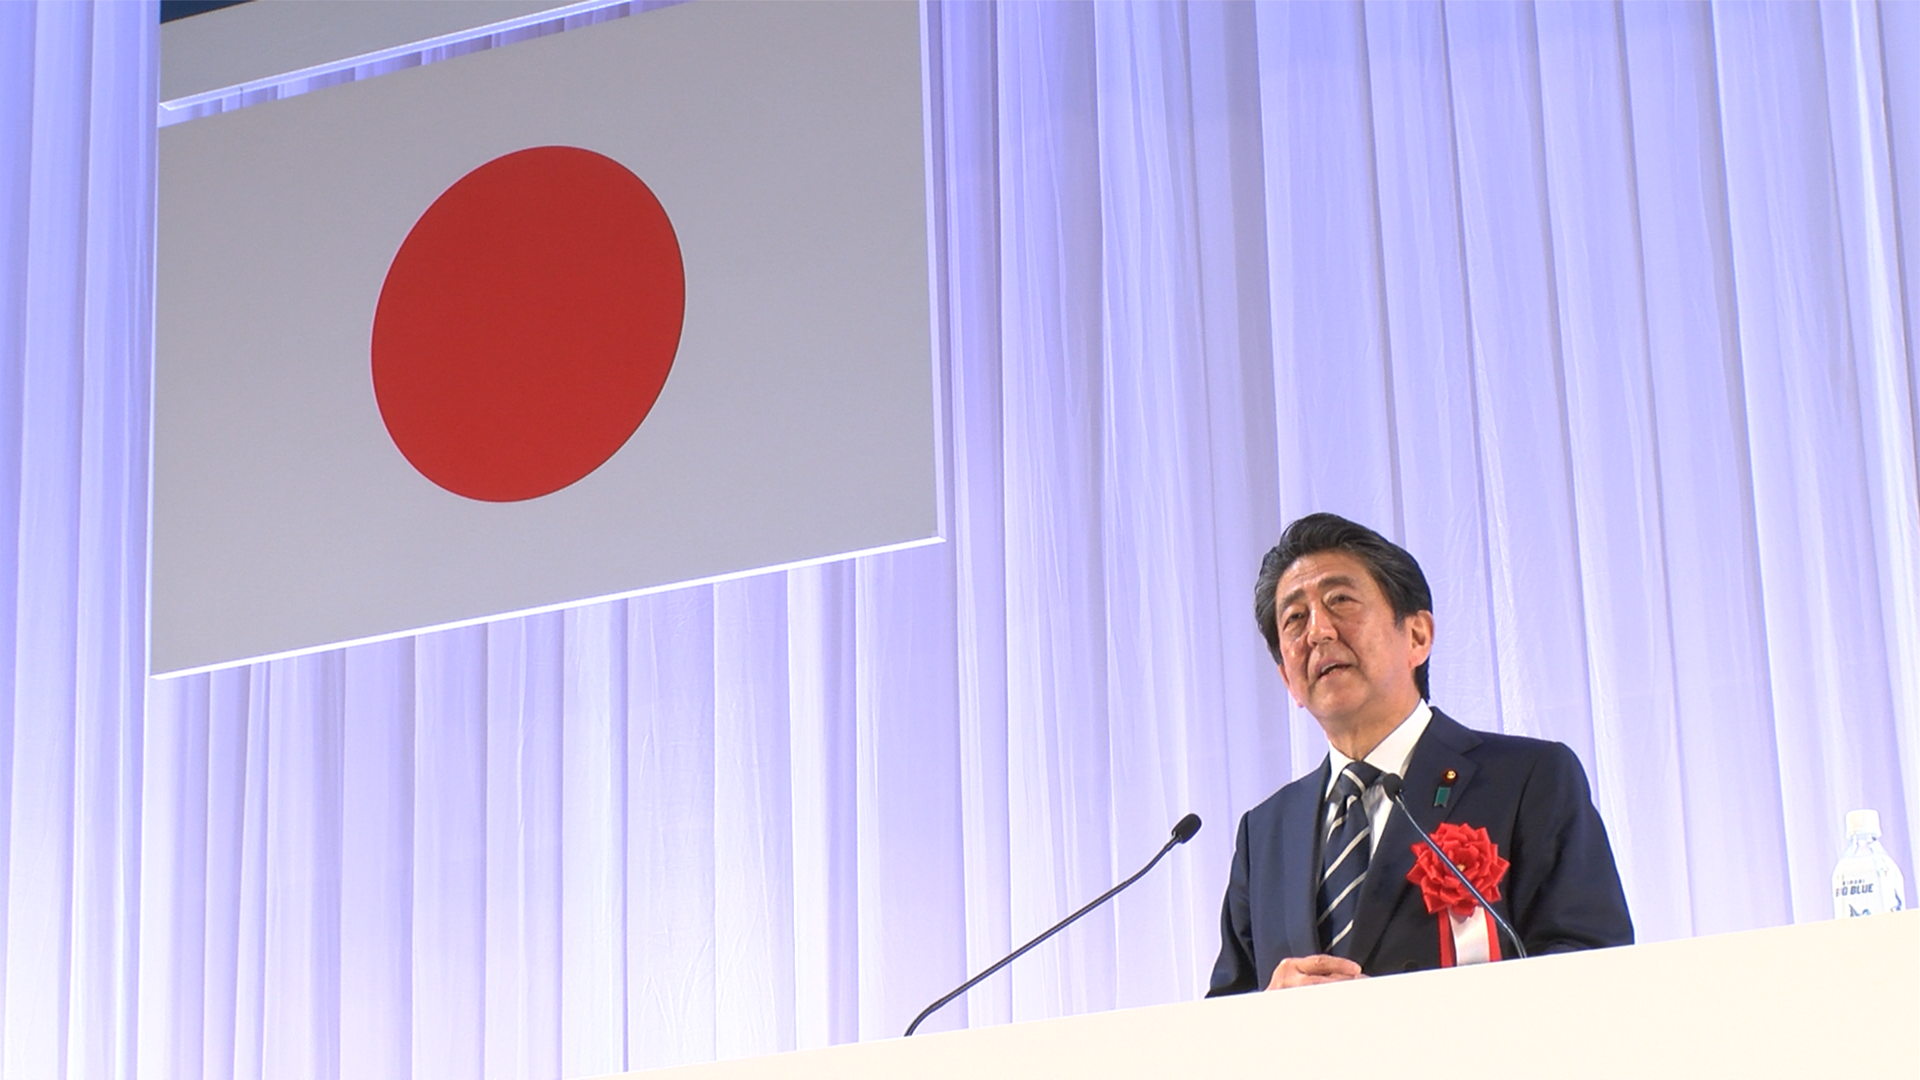 Statement on the Passing of former Prime Minister Shinzo Abe